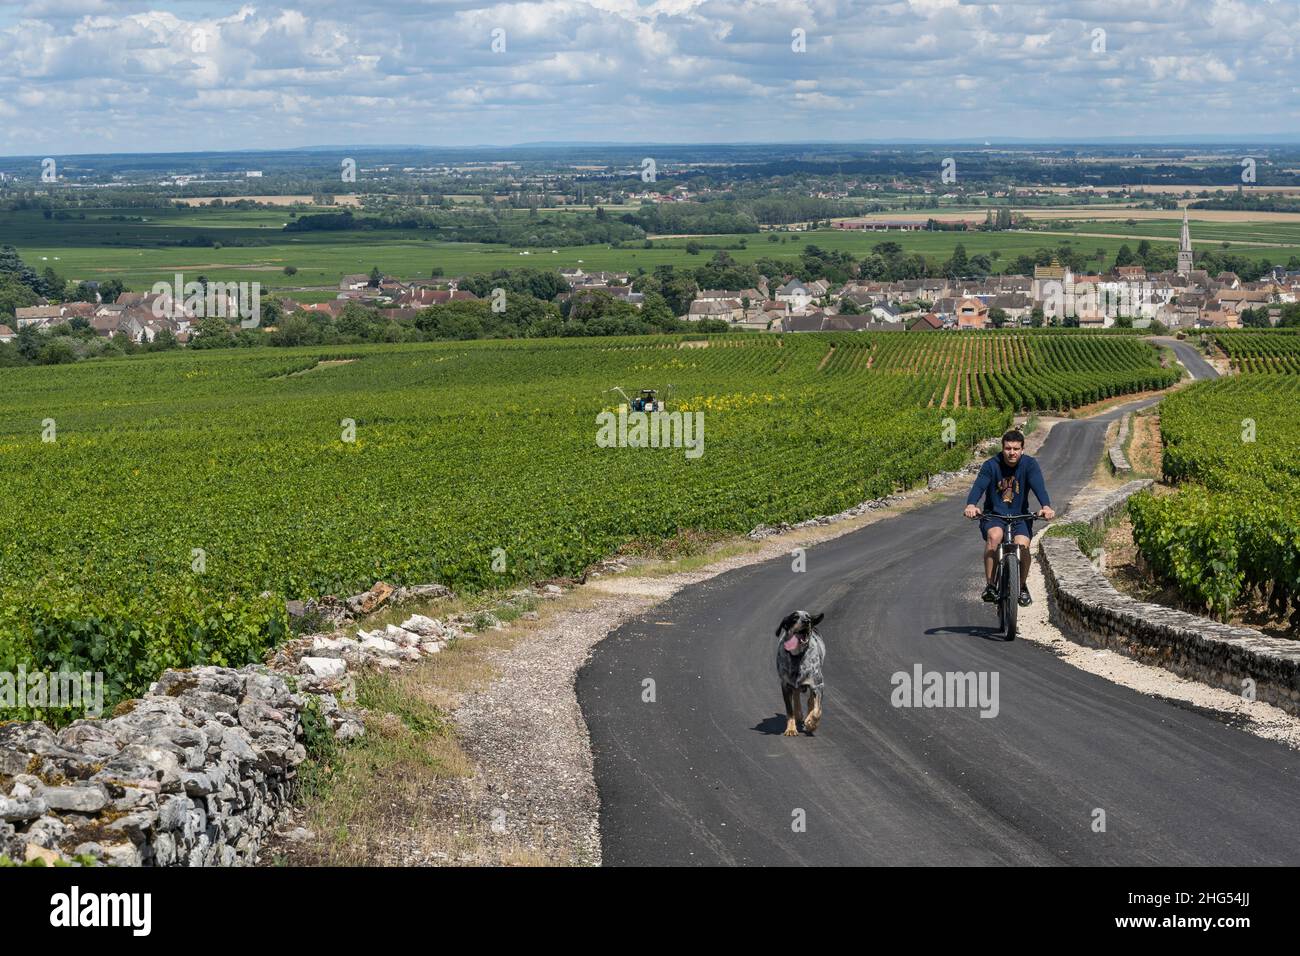 Meursault, France - June 29, 2020: Vineyards near Meursault in the Burgundy with country road, biker and dog, France. Stock Photo